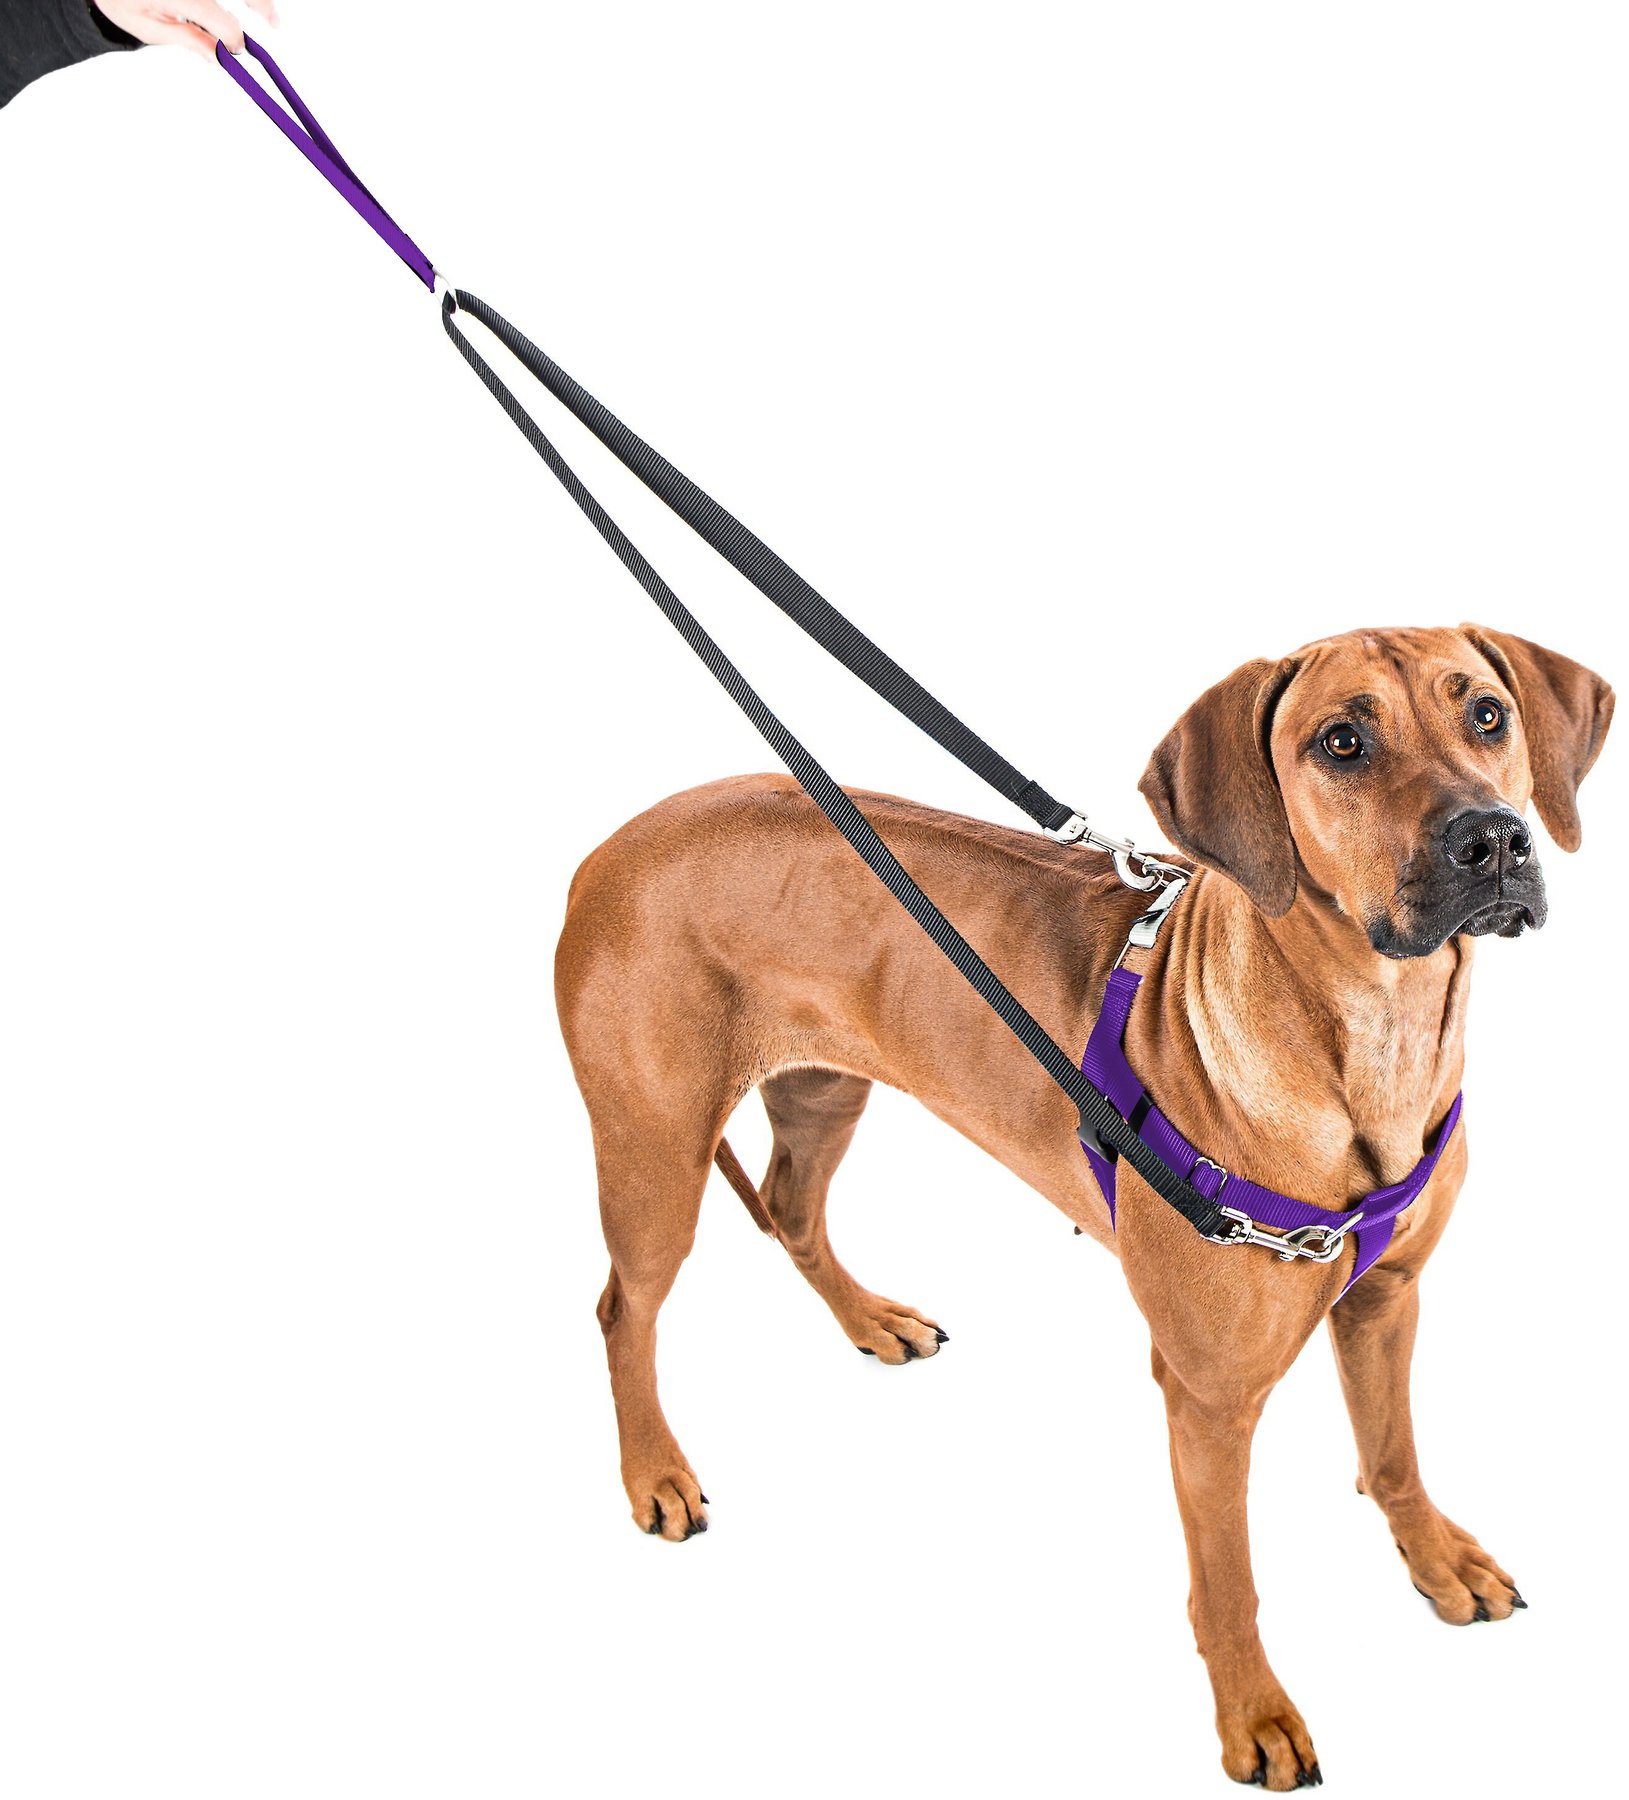 for Small Medium and Large Dogs Adjustable Gentle Comfortable Control for Easy Dog Walking Made in USA 2 Hounds Design Freedom No Pull Dog Harness